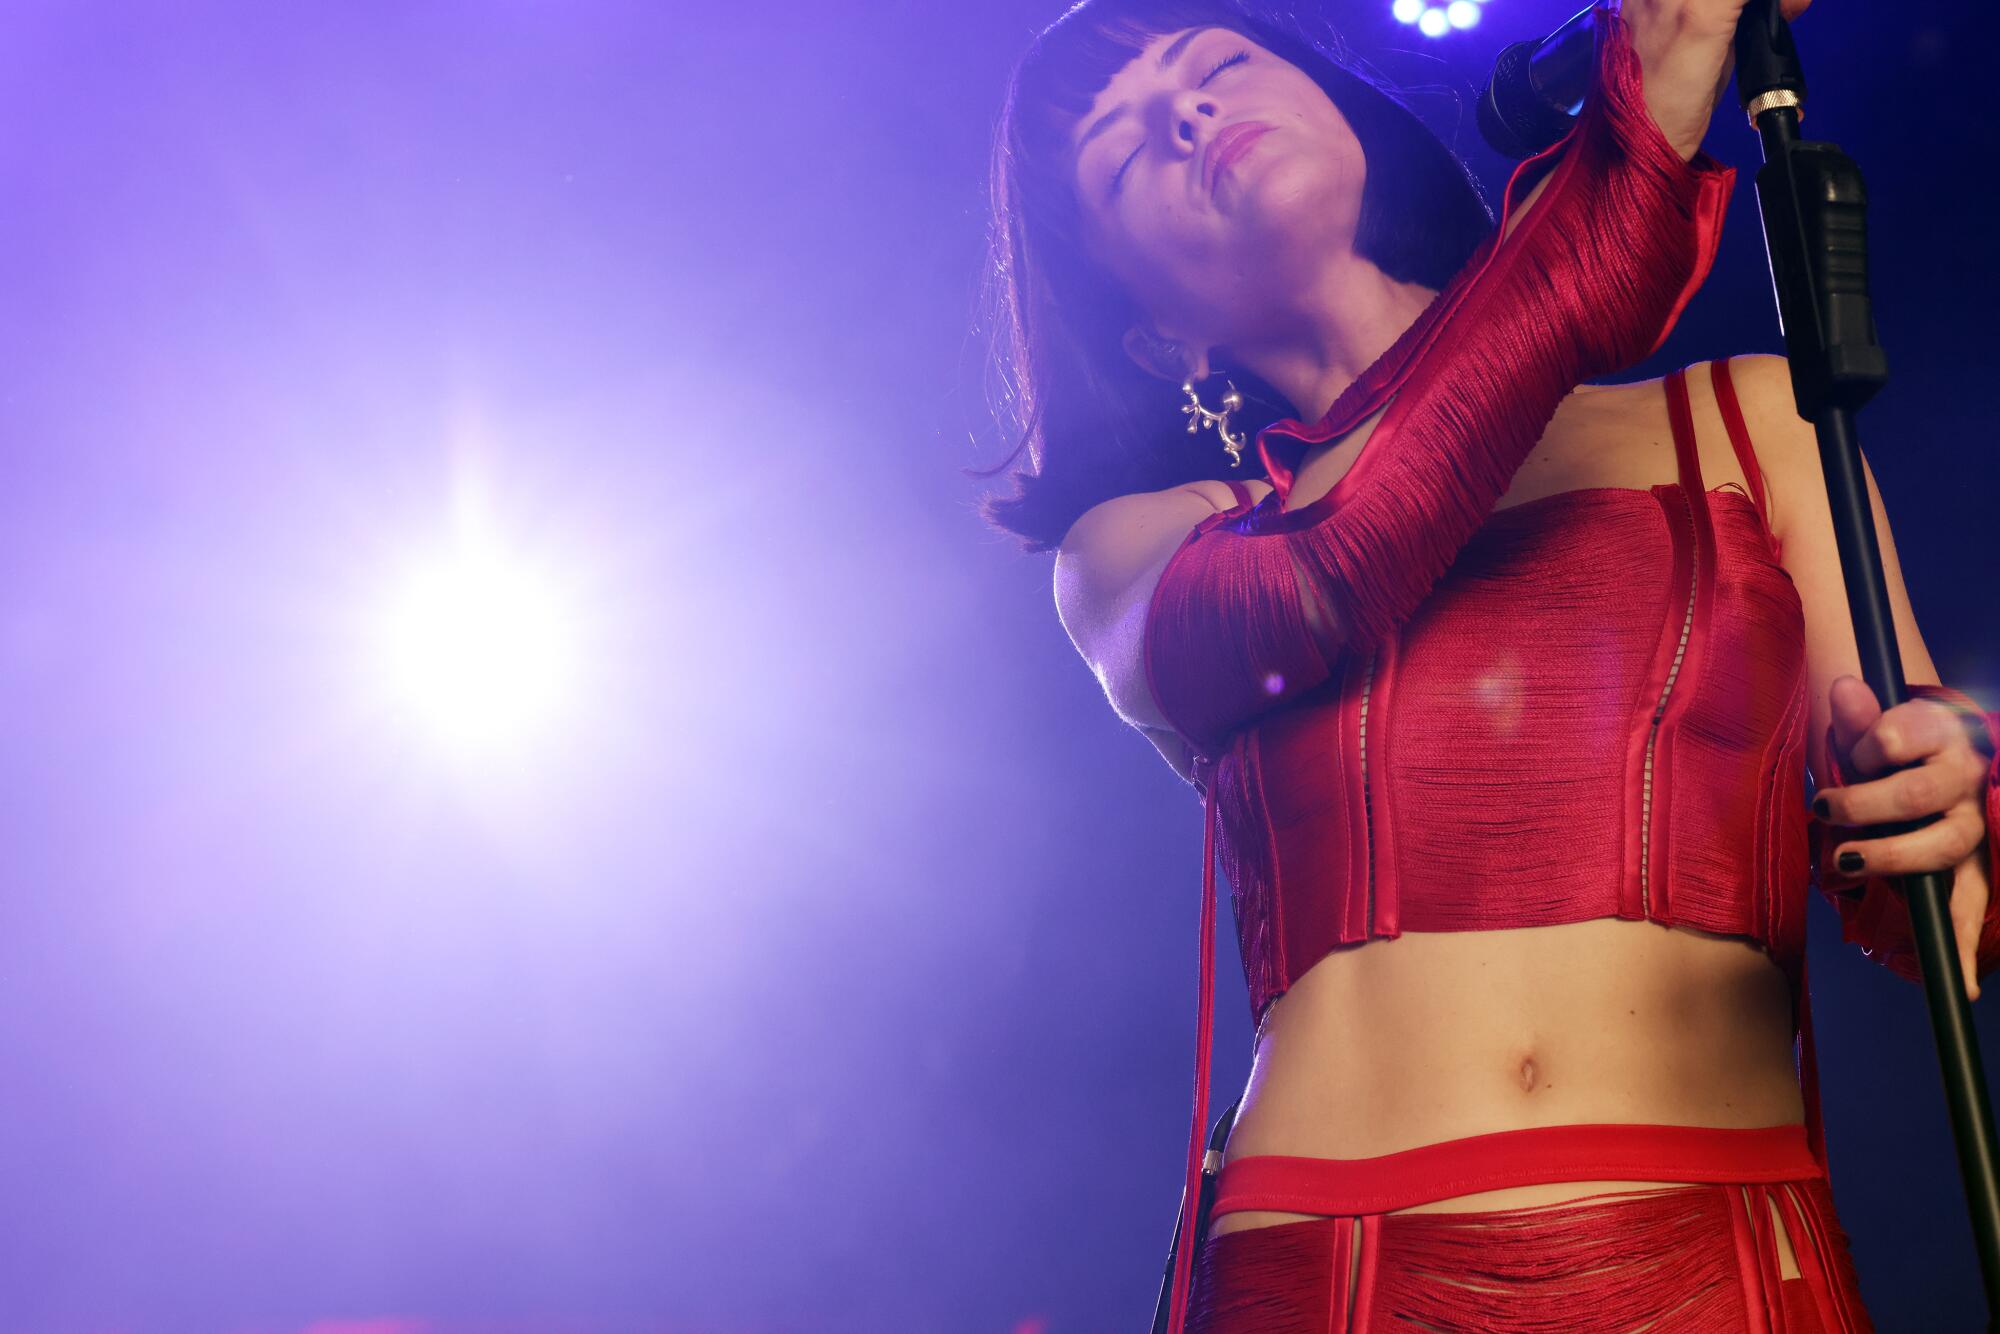 A woman in a red outfit closes her eyes as light shines beside her.